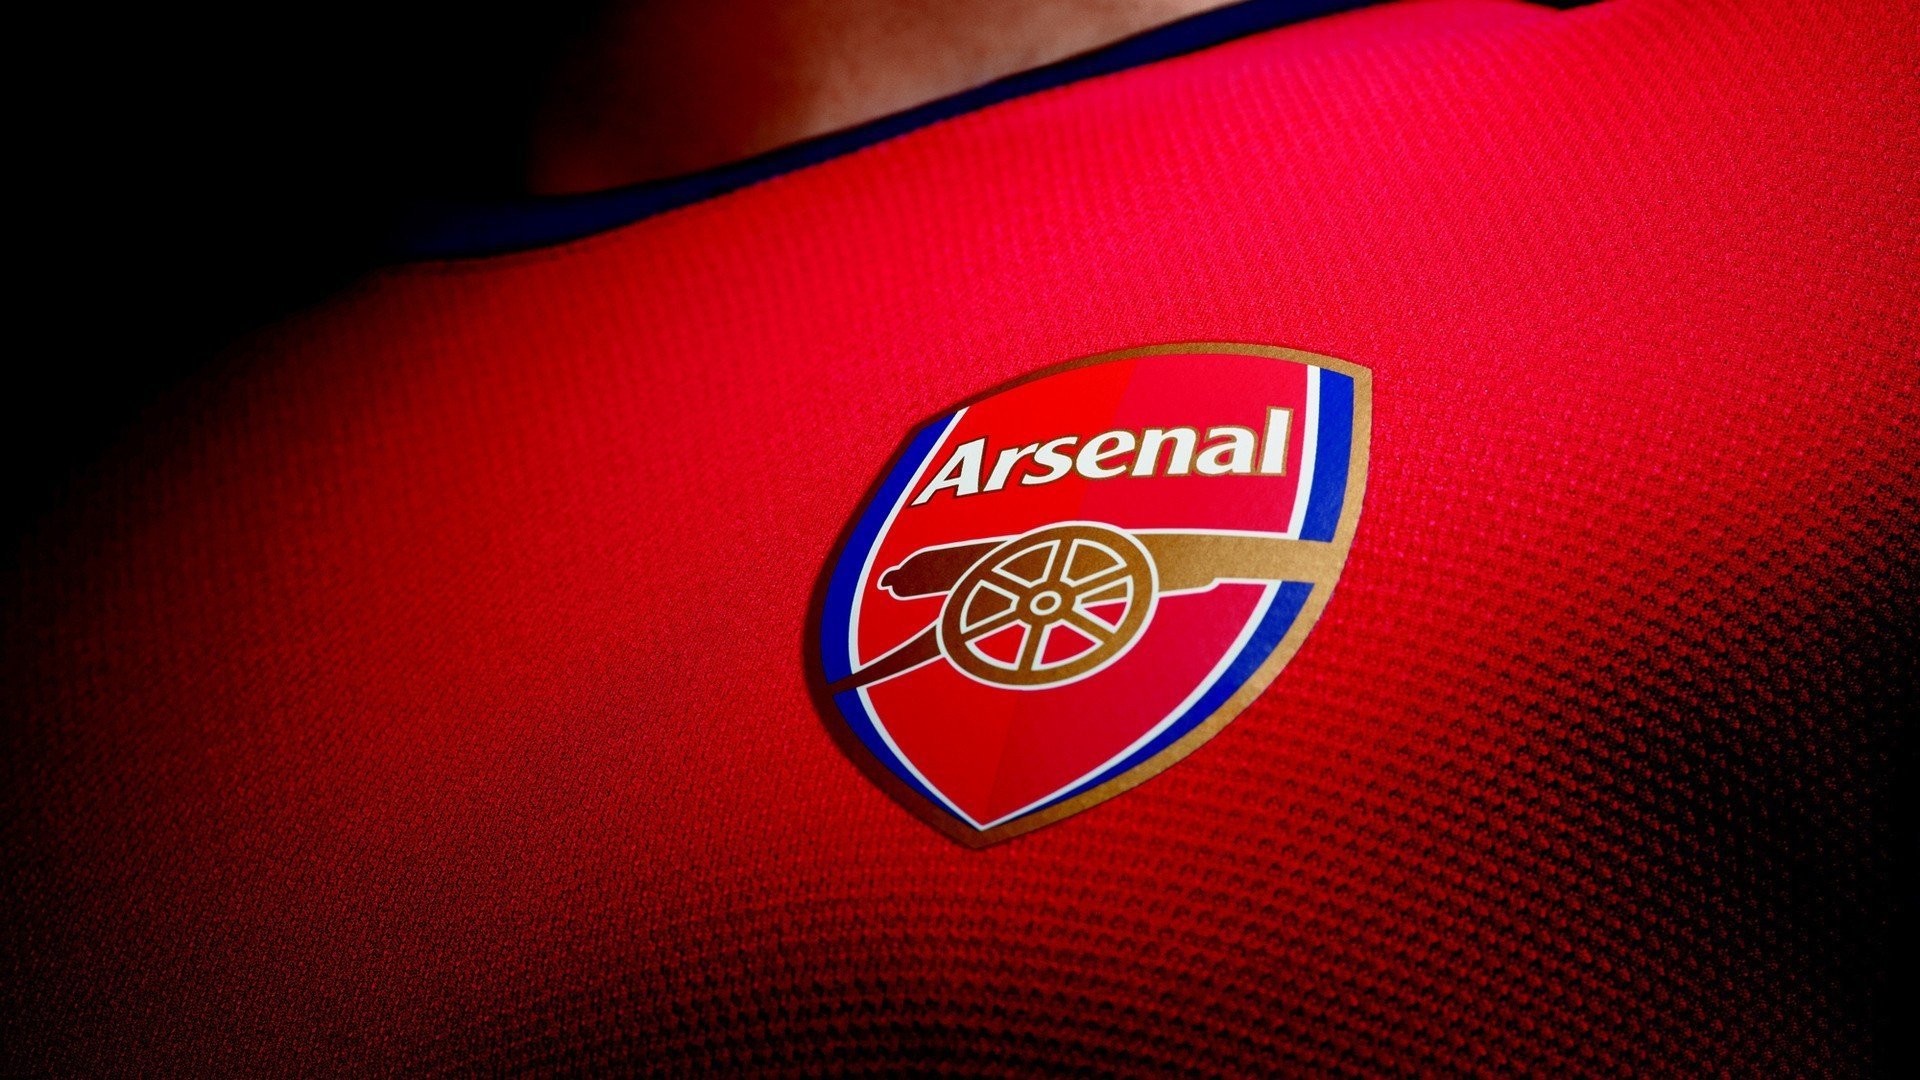 Awesome Arsenal F.C. free wallpaper ID:444778 for hd 1920x1080 desktop